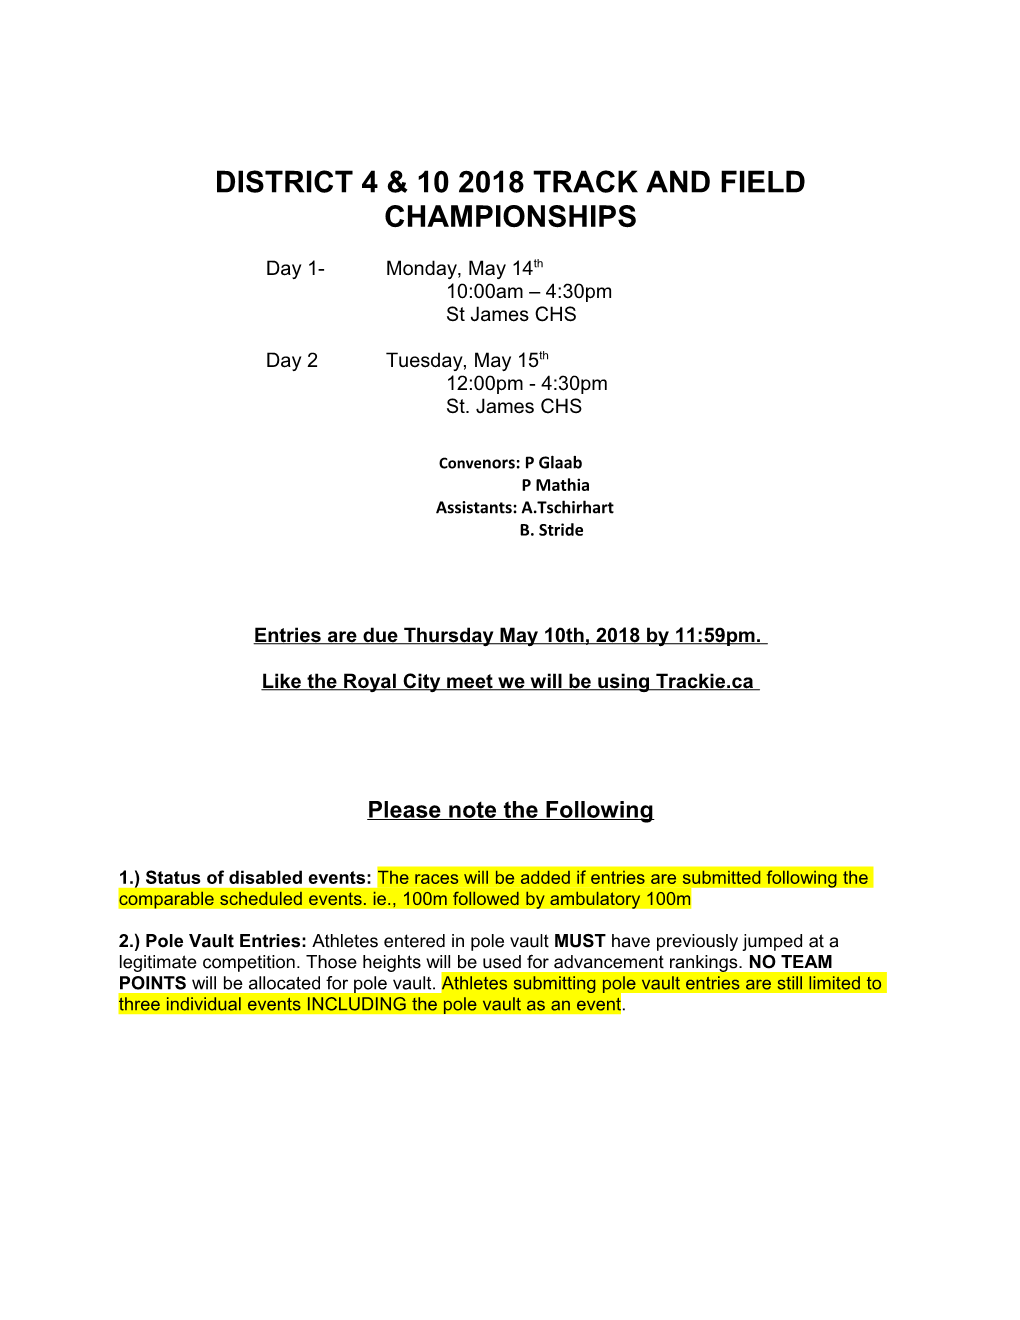 District 4 & 102018 Track and Field